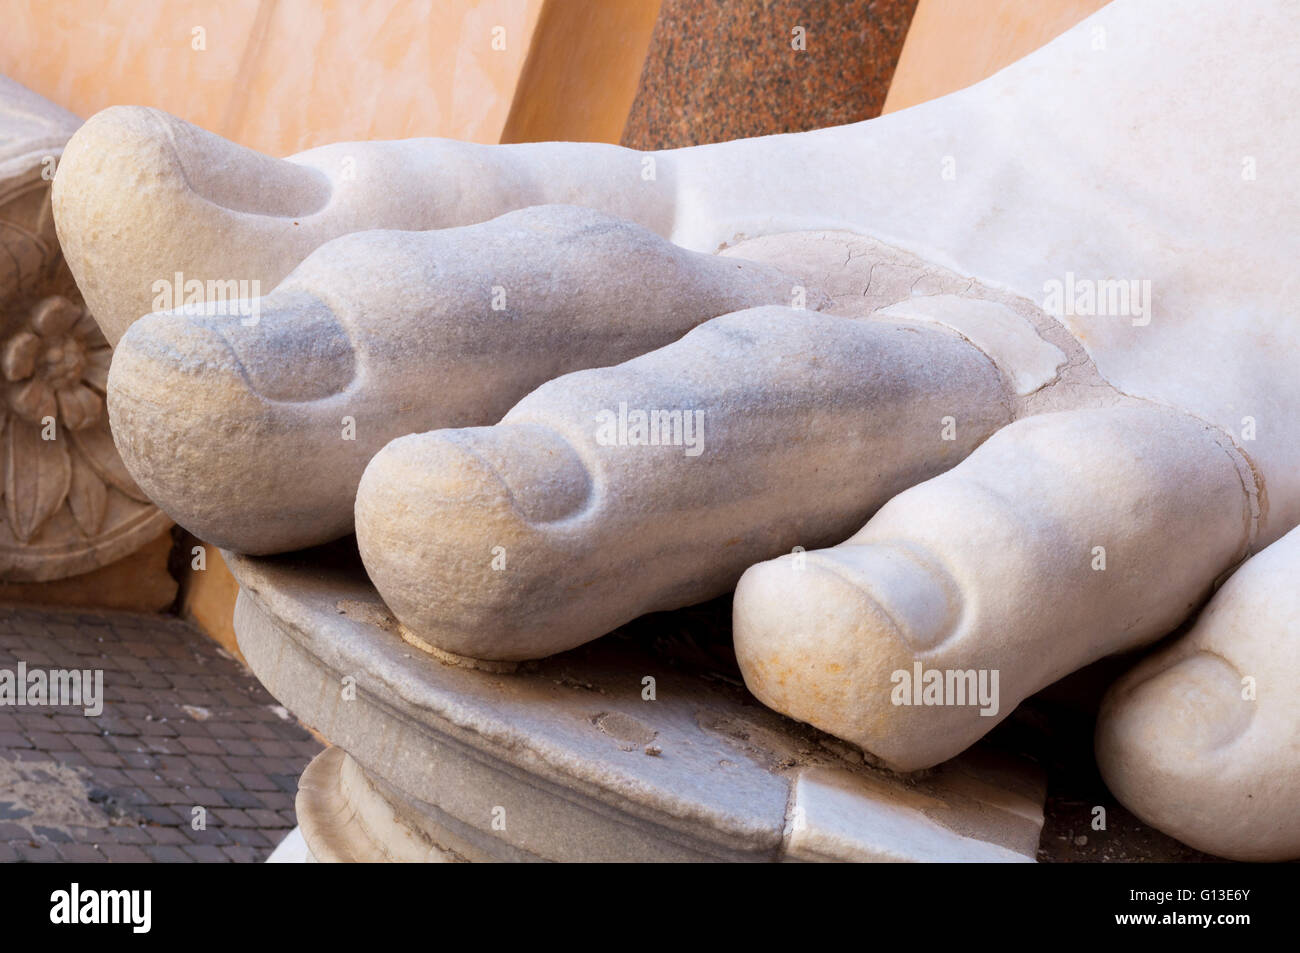 Constantine's Foot, Musei Capitoli, Rome, Italy.  This is part of what was once a giant marble sculpture of Emperor Constantine. Stock Photo